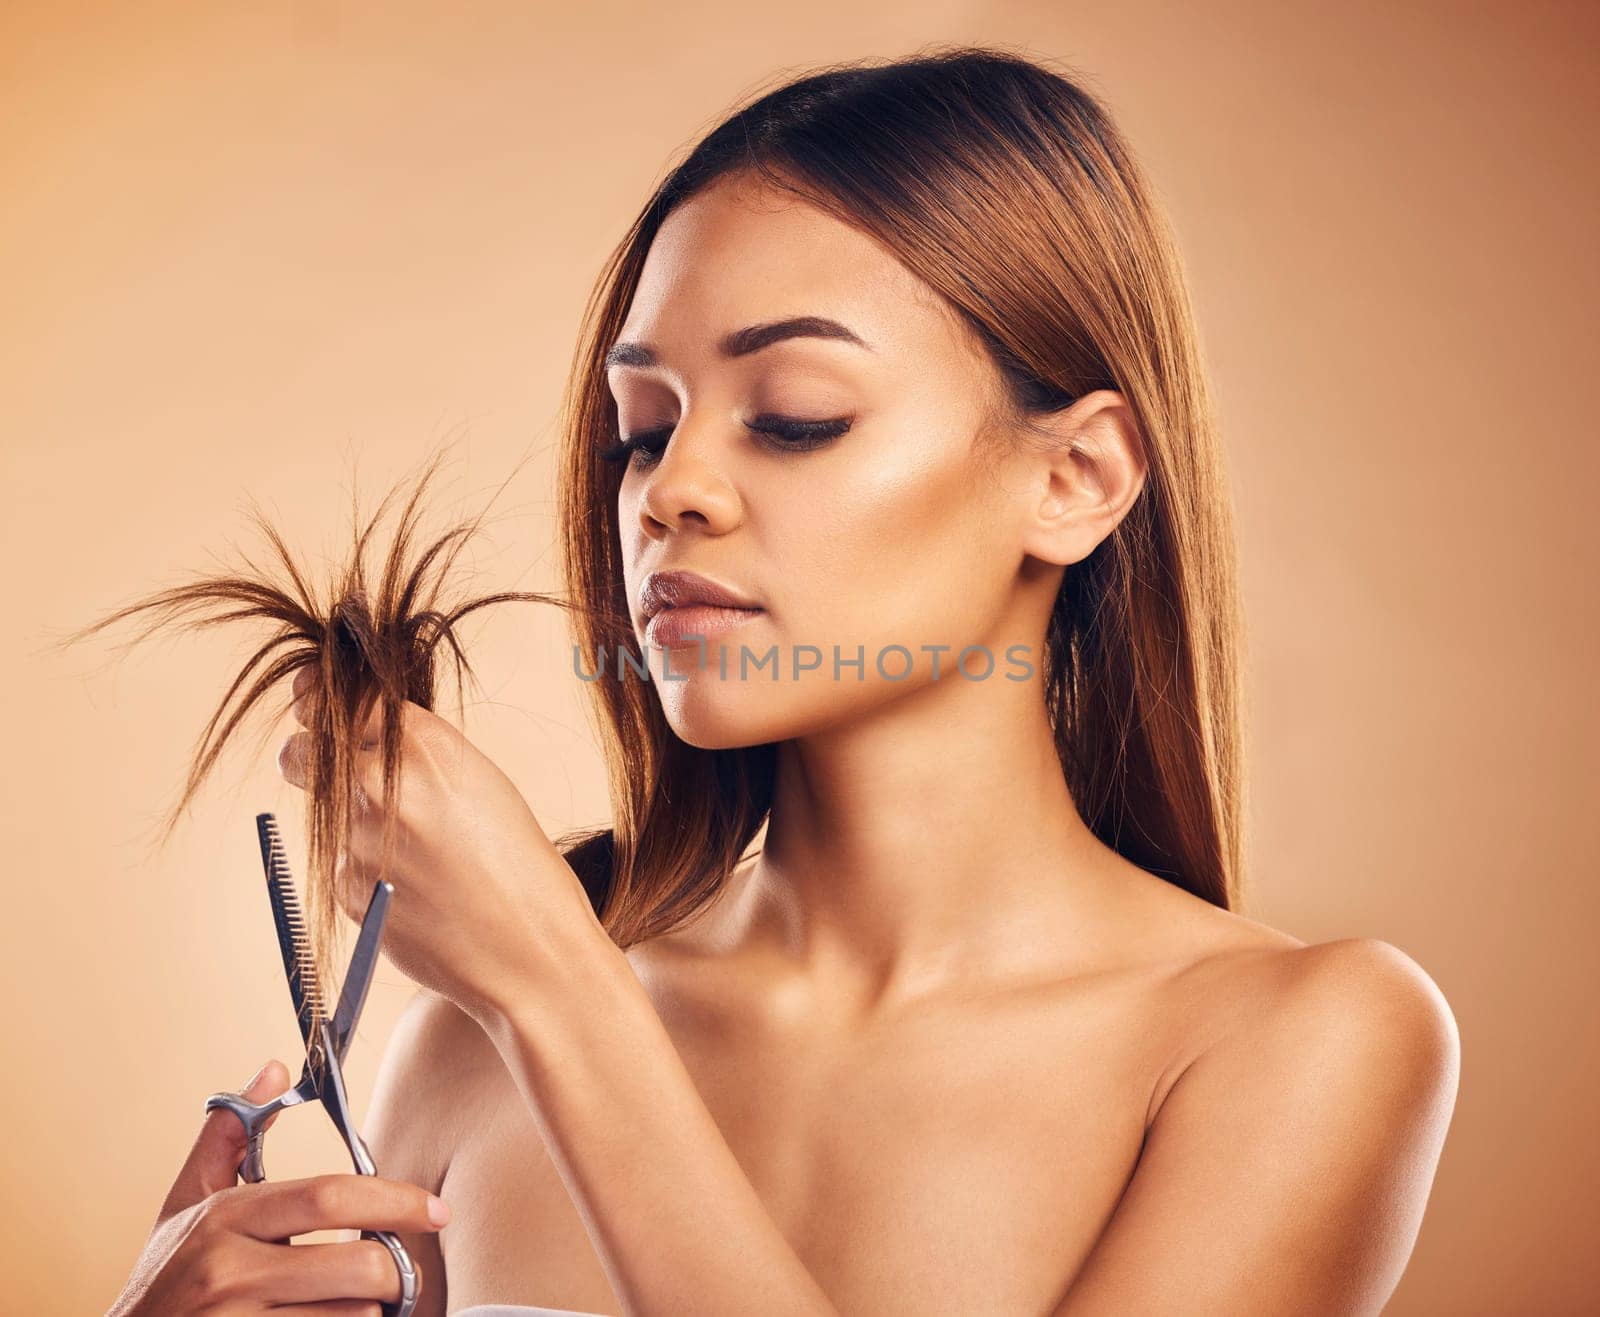 Woman cutting hair, split ends and beauty with haircare, damage and dry texture isolated on studio background. Female model, scissors for tips and cosmetic keratin treatment, haircut and hairstyle.